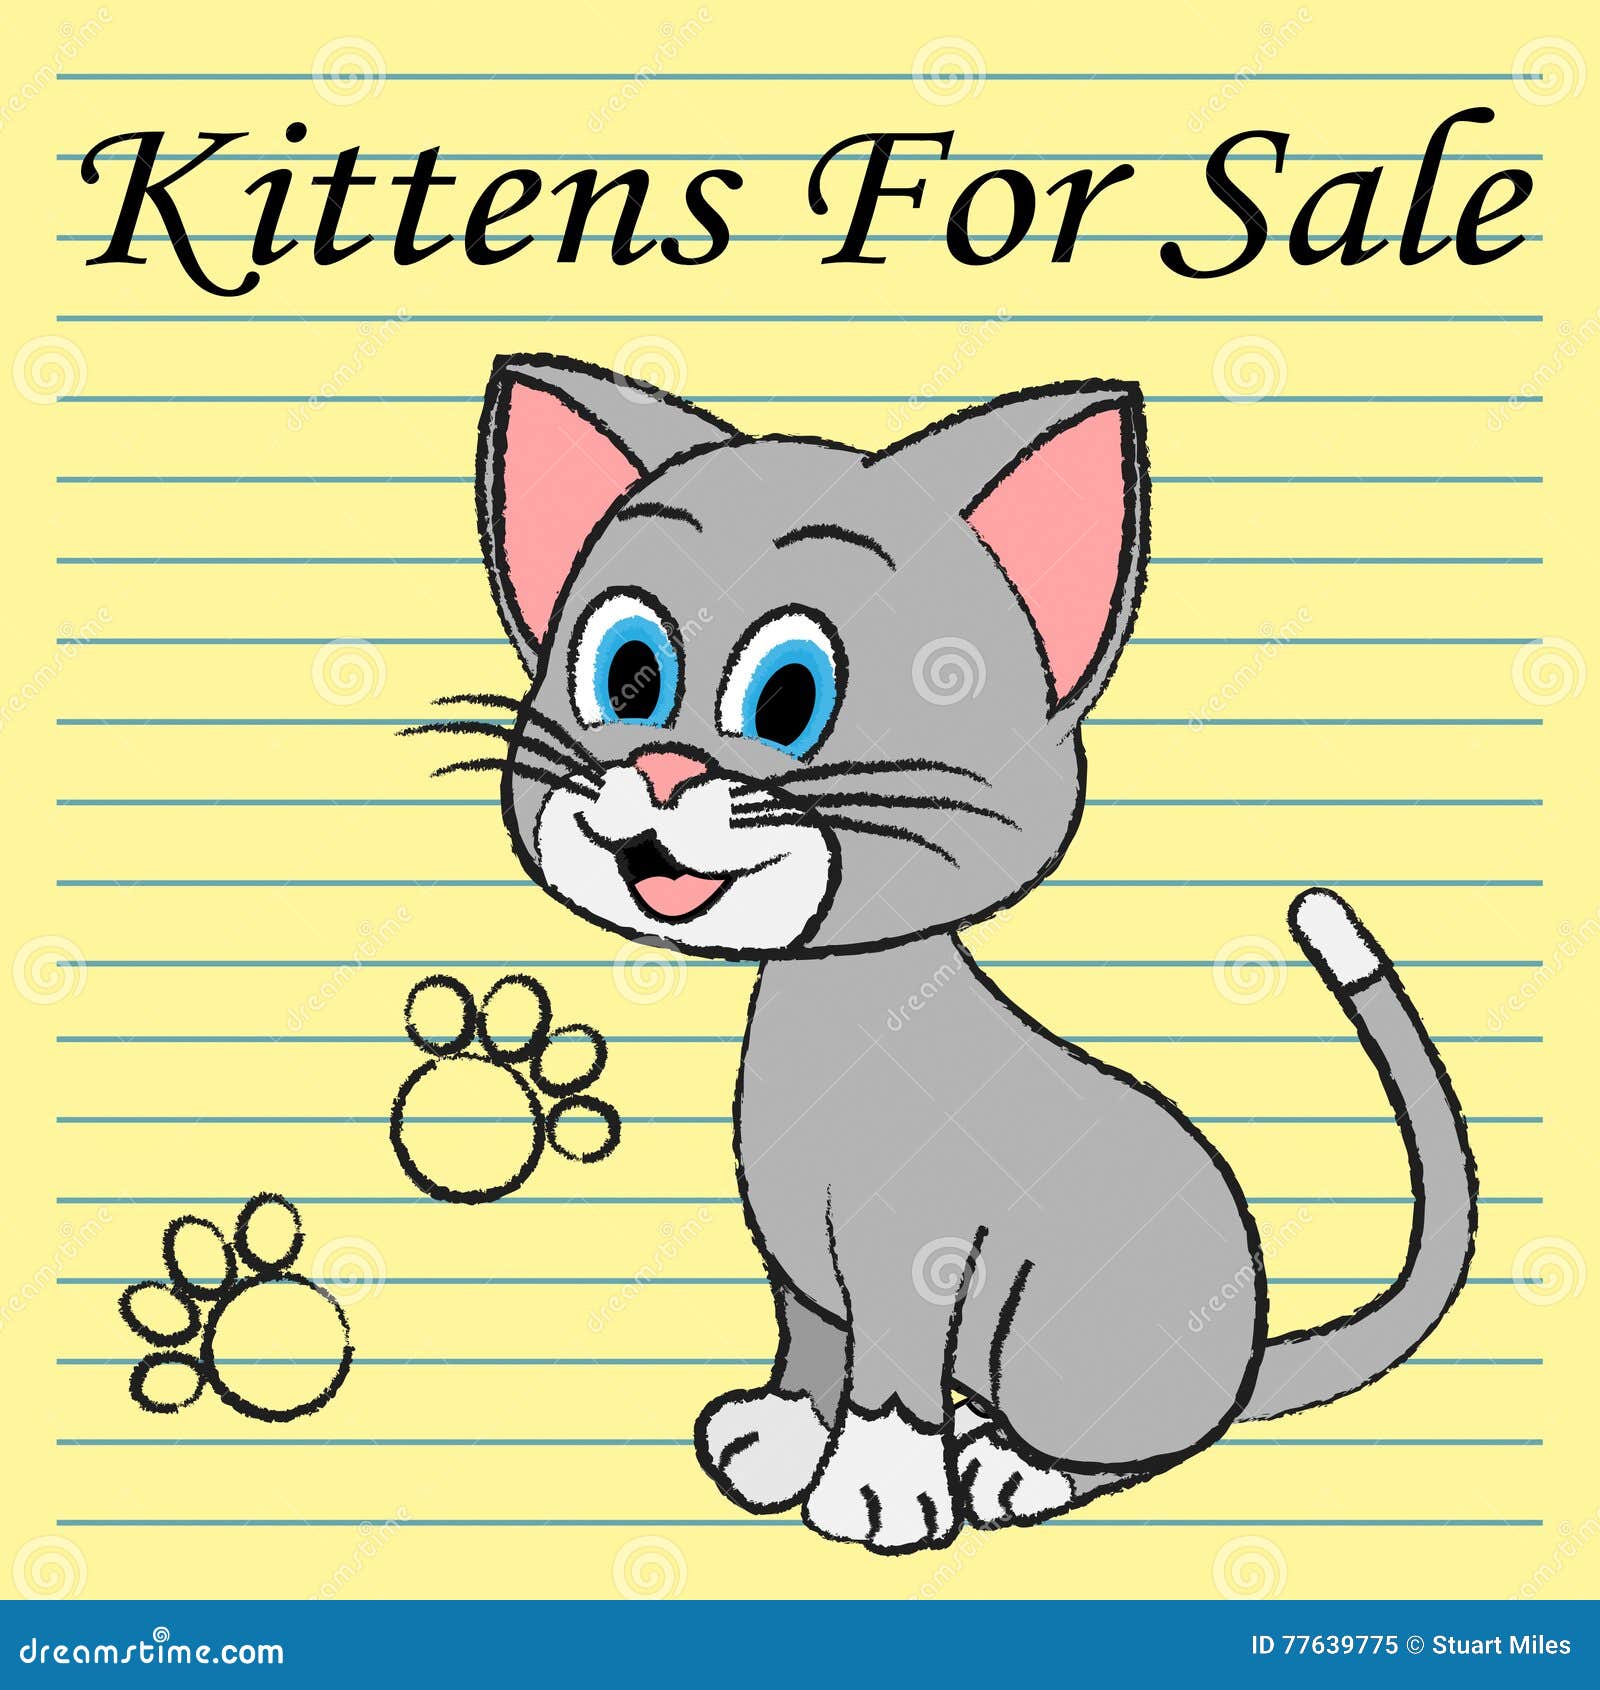 Tittens For Sale